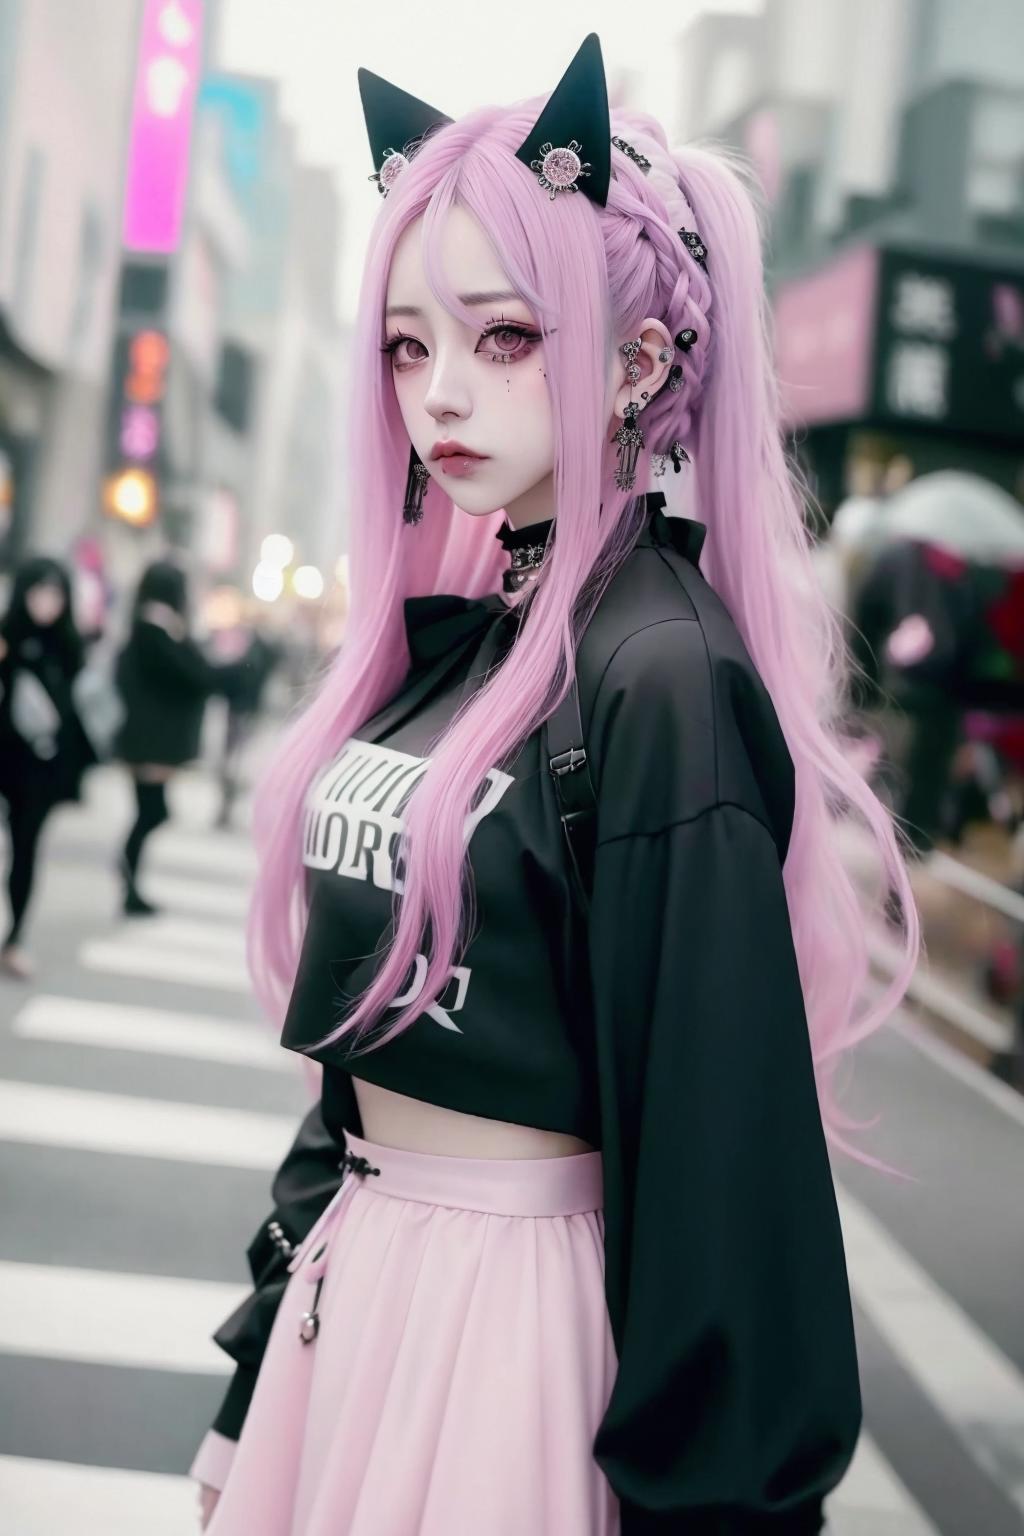 Gothic Punk Girl image by Gasia